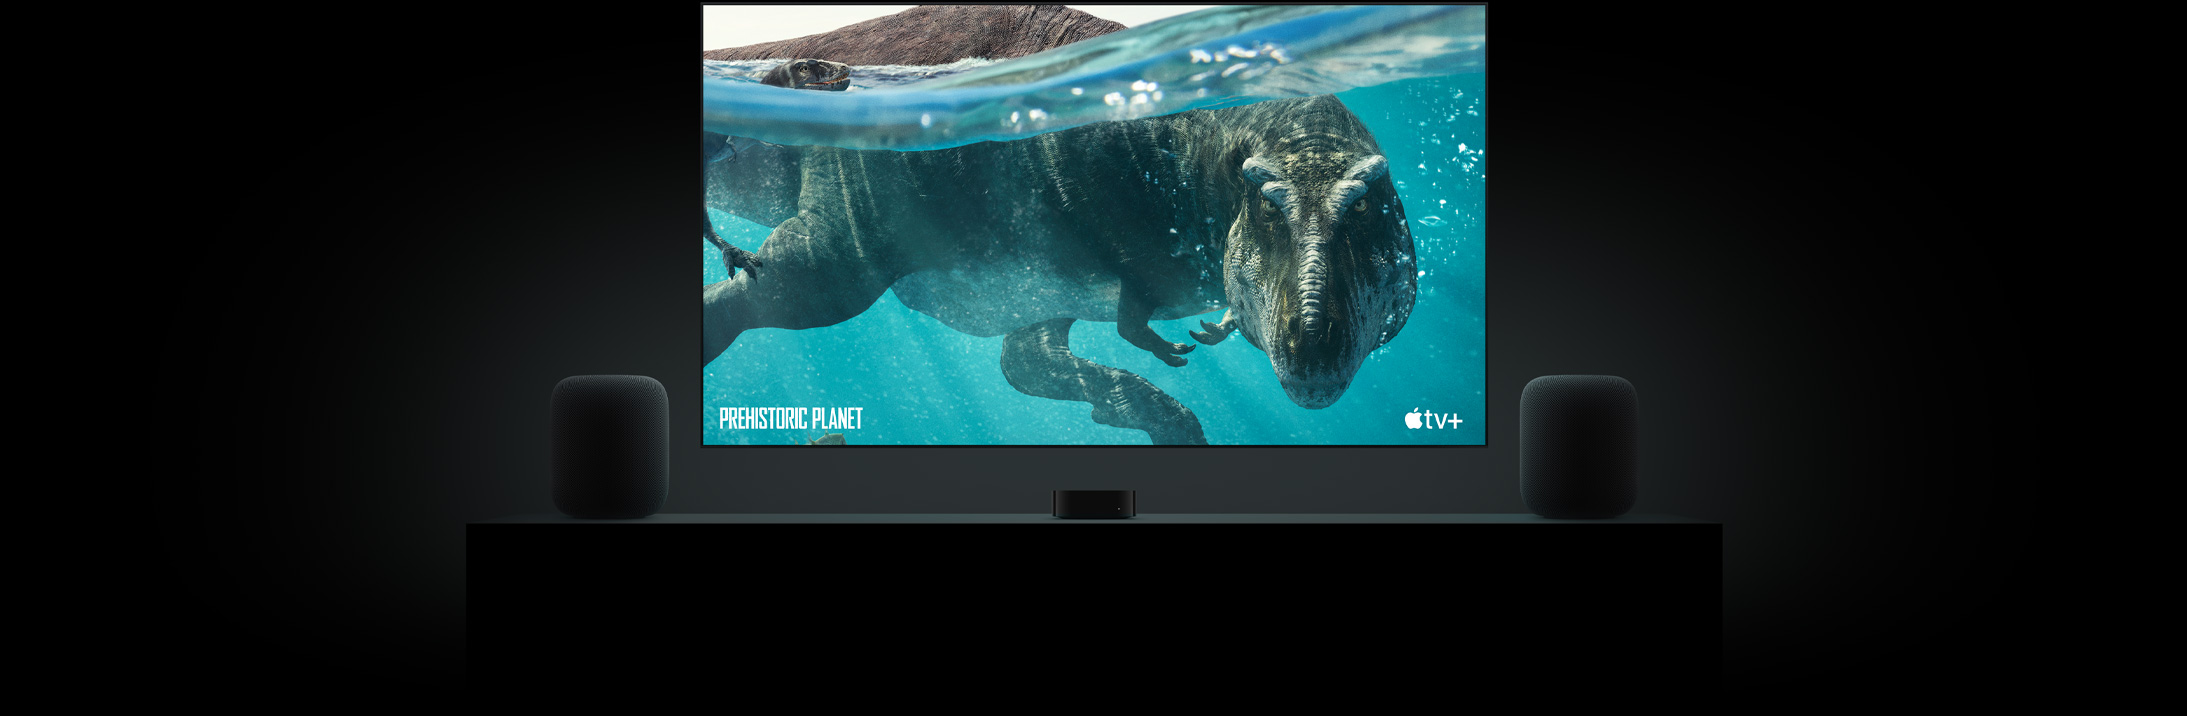 Large flat screen TV featuring a vivid image of a dinosaur from Prehistoric Planet. The TV is hung above an Apple TV and framed by two HomePod speakers placed on a livingroom console